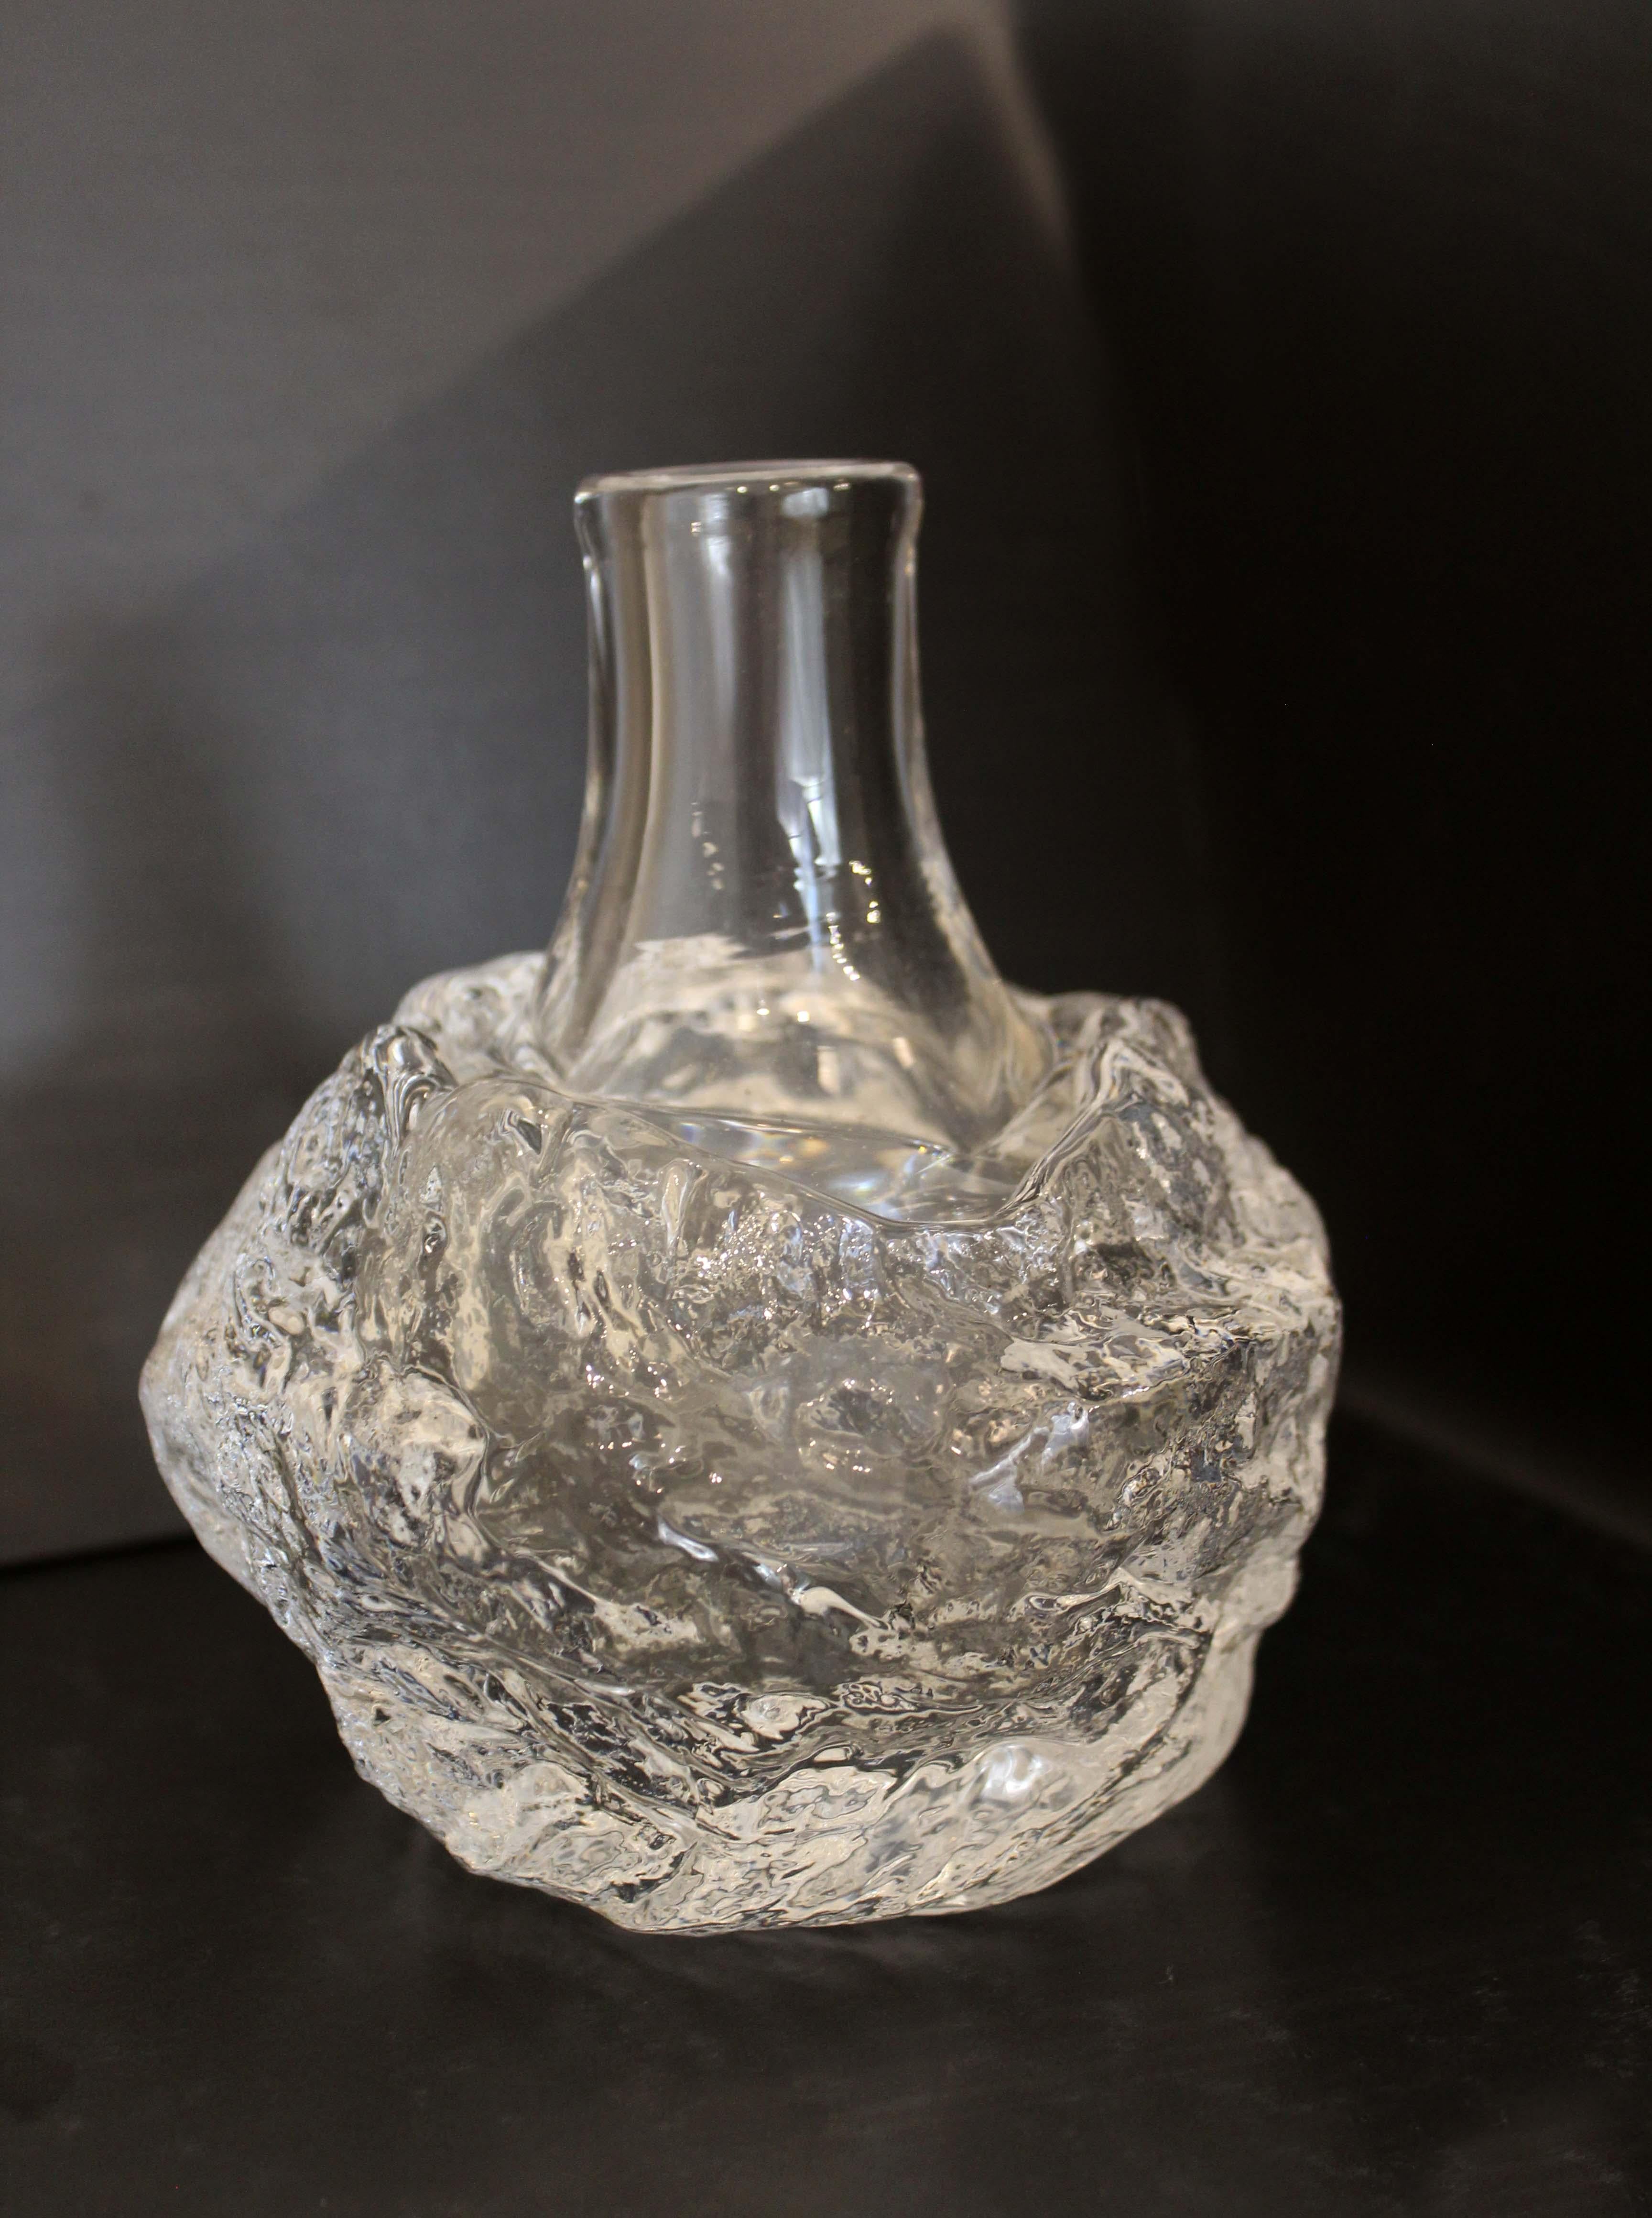 Waarf Rare Kosta glass vessel clear glass overlay. In excellent condition. Dimensions: 5